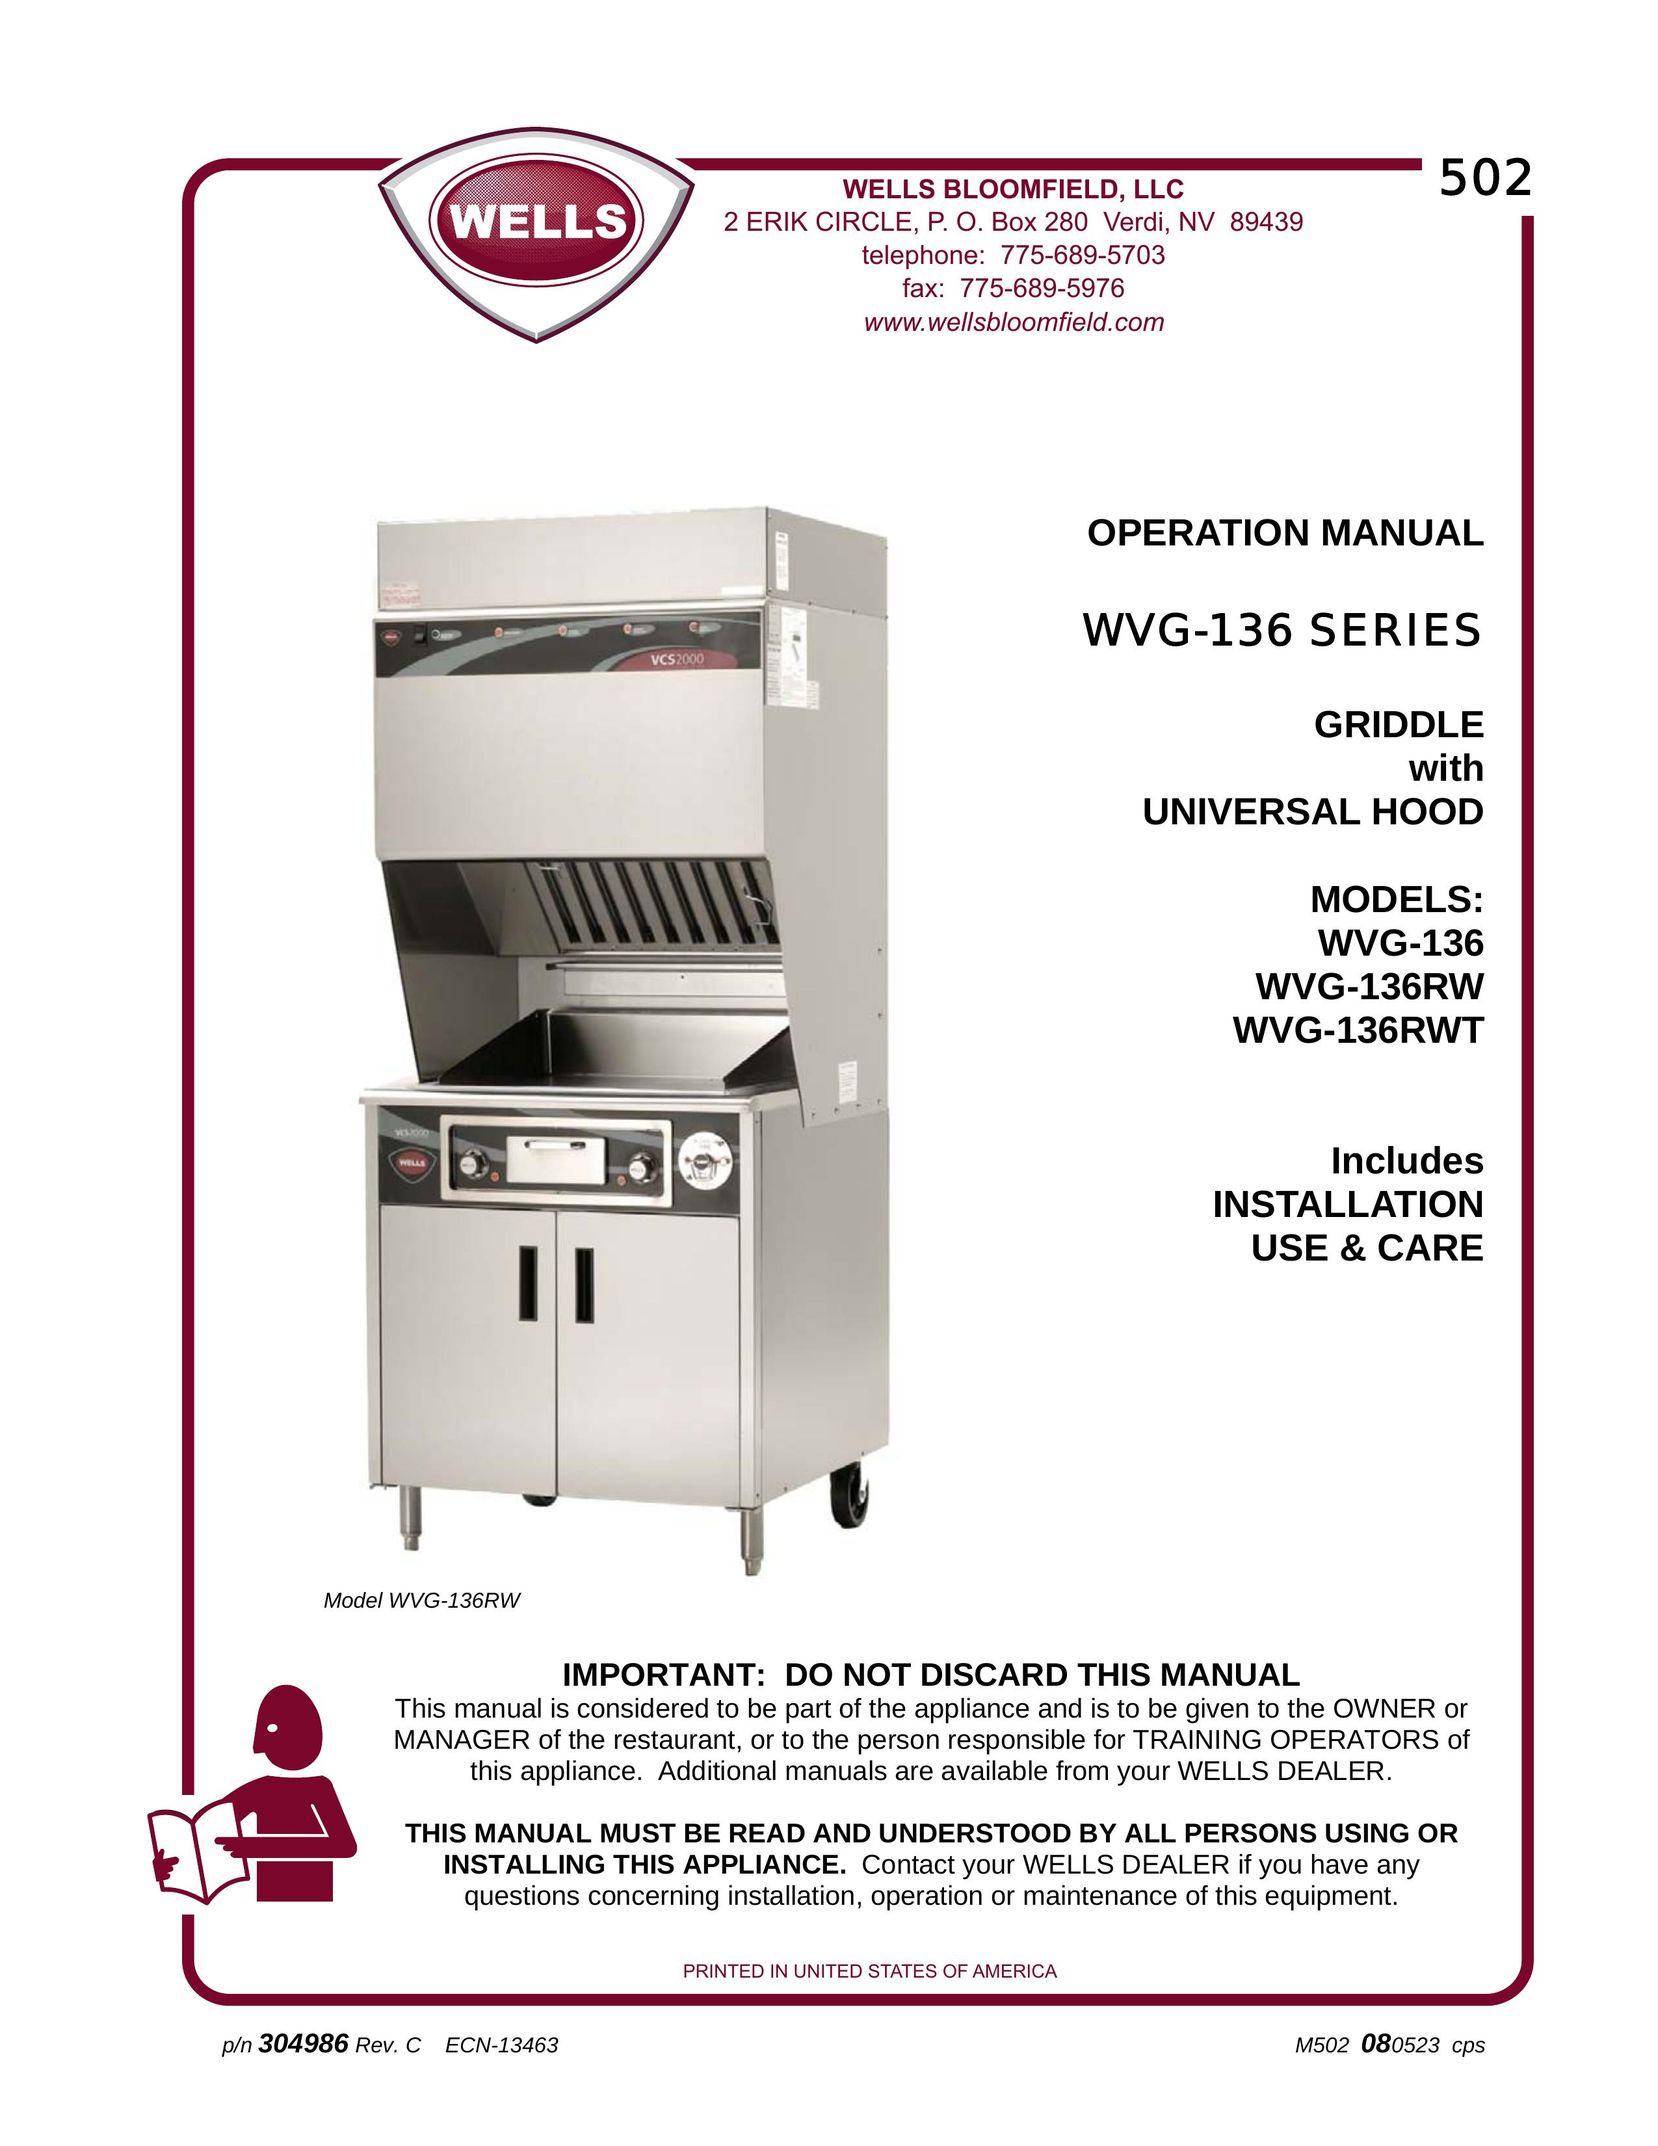 Bloomfield WVG-136RW Griddle User Manual